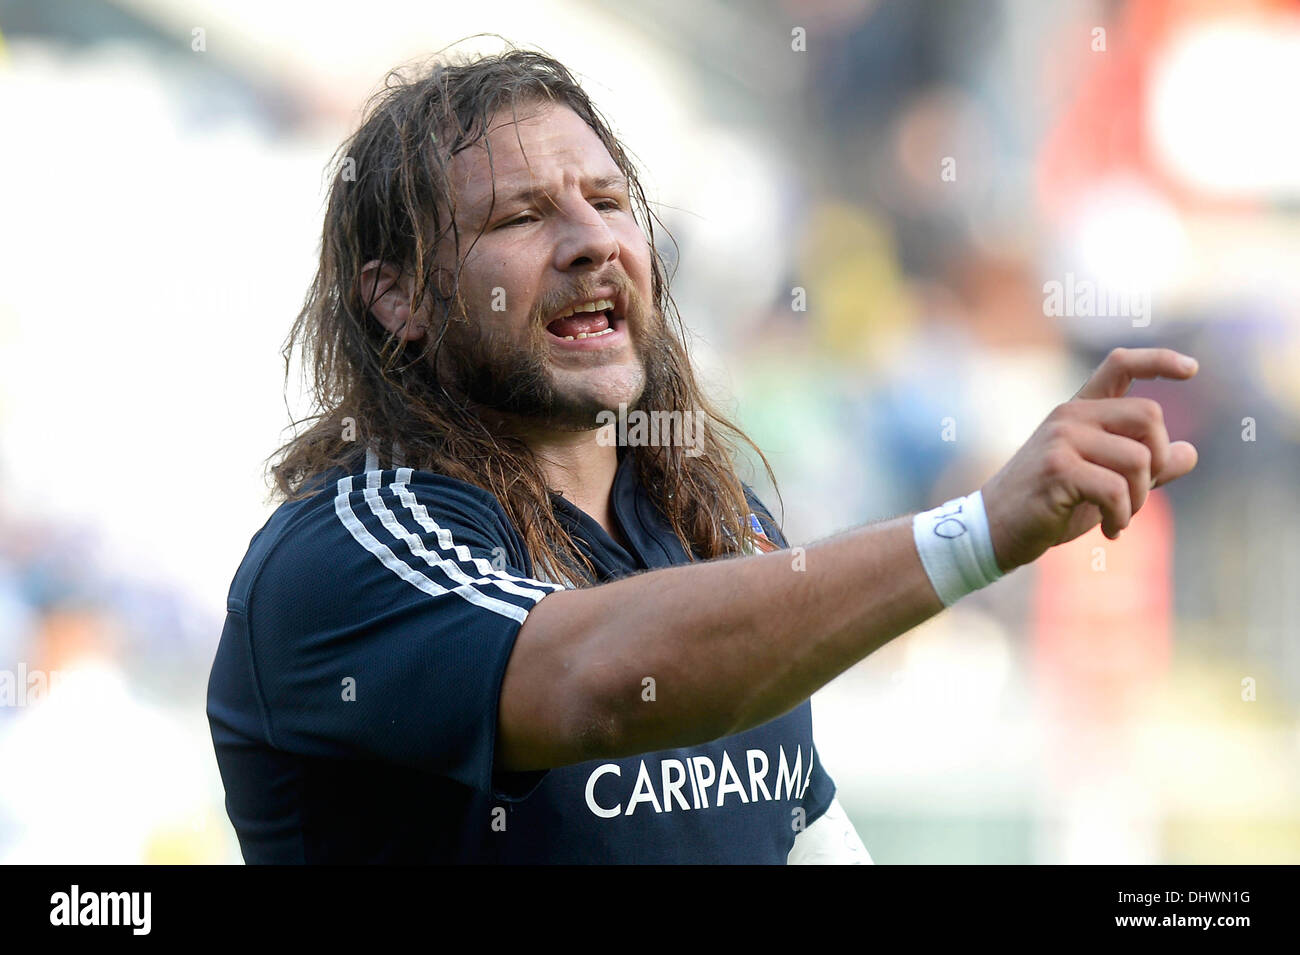 Torino, Italy. 9th Nov, 2013. Martin Castrogiovanni during the rugby test match between Italy and Australia at Stadio Olimpico on November 9, 2013 in Torino, Italy.Photo: Filippo Alfero/NurPhoto © Filippo Alfero/NurPhoto/ZUMAPRESS.com/Alamy Live News Stock Photo